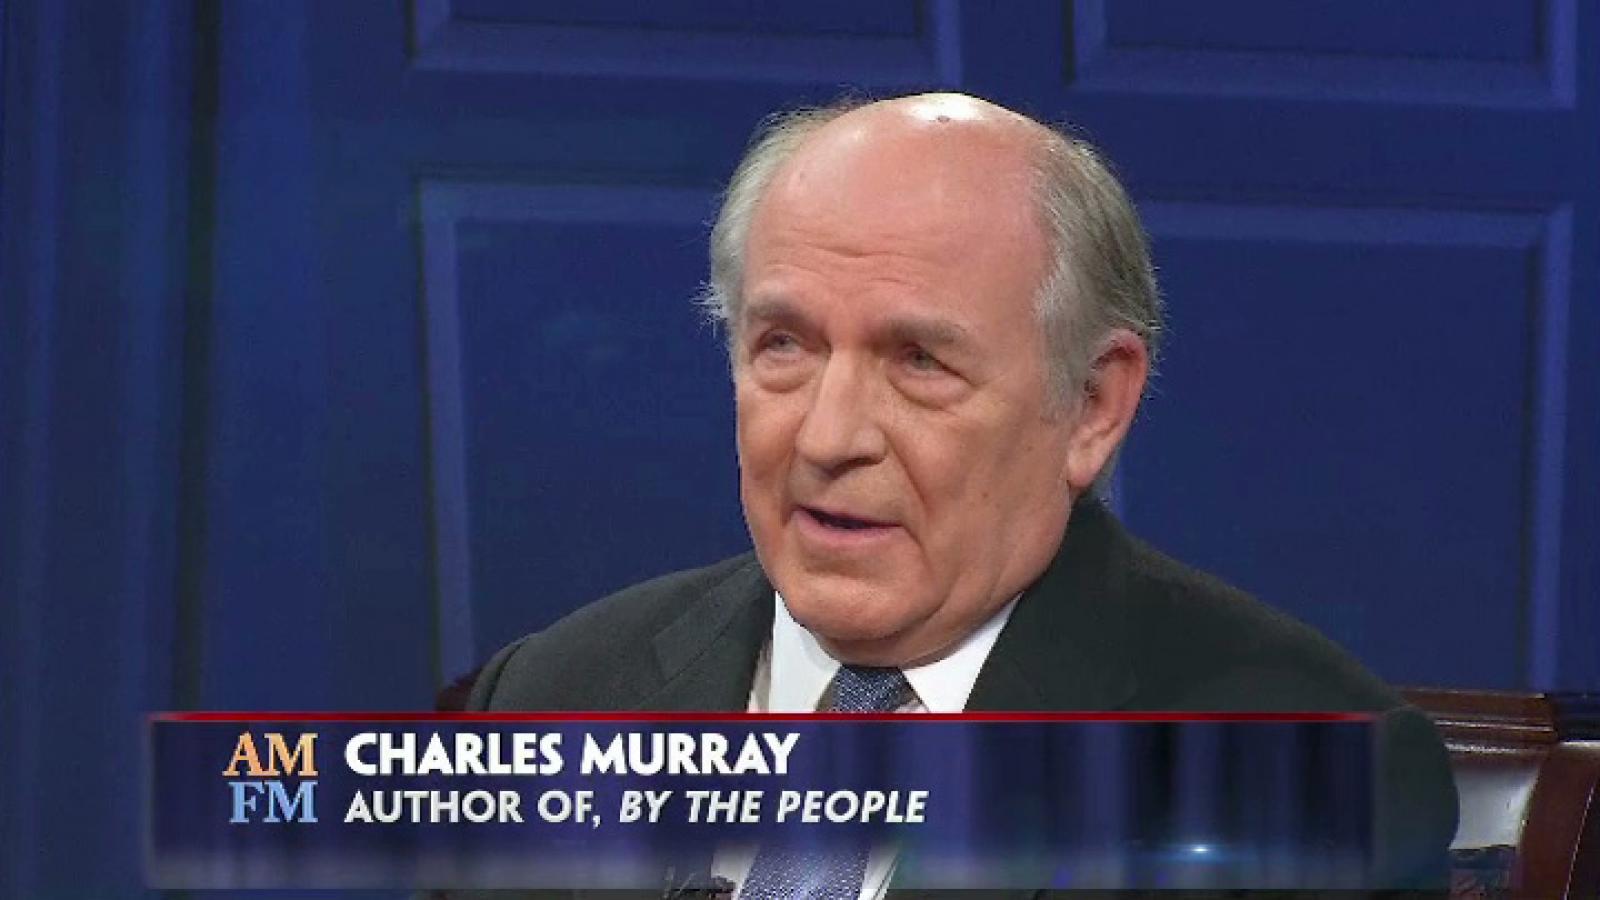 In Charles Murray’s newest book, By the People, the sometimes controversial author gives a spirited rebuke to government overreach, and proposes a campaign of non-violent civil disobedience in which citizens would simply refuse to follow many federal and state regulations.